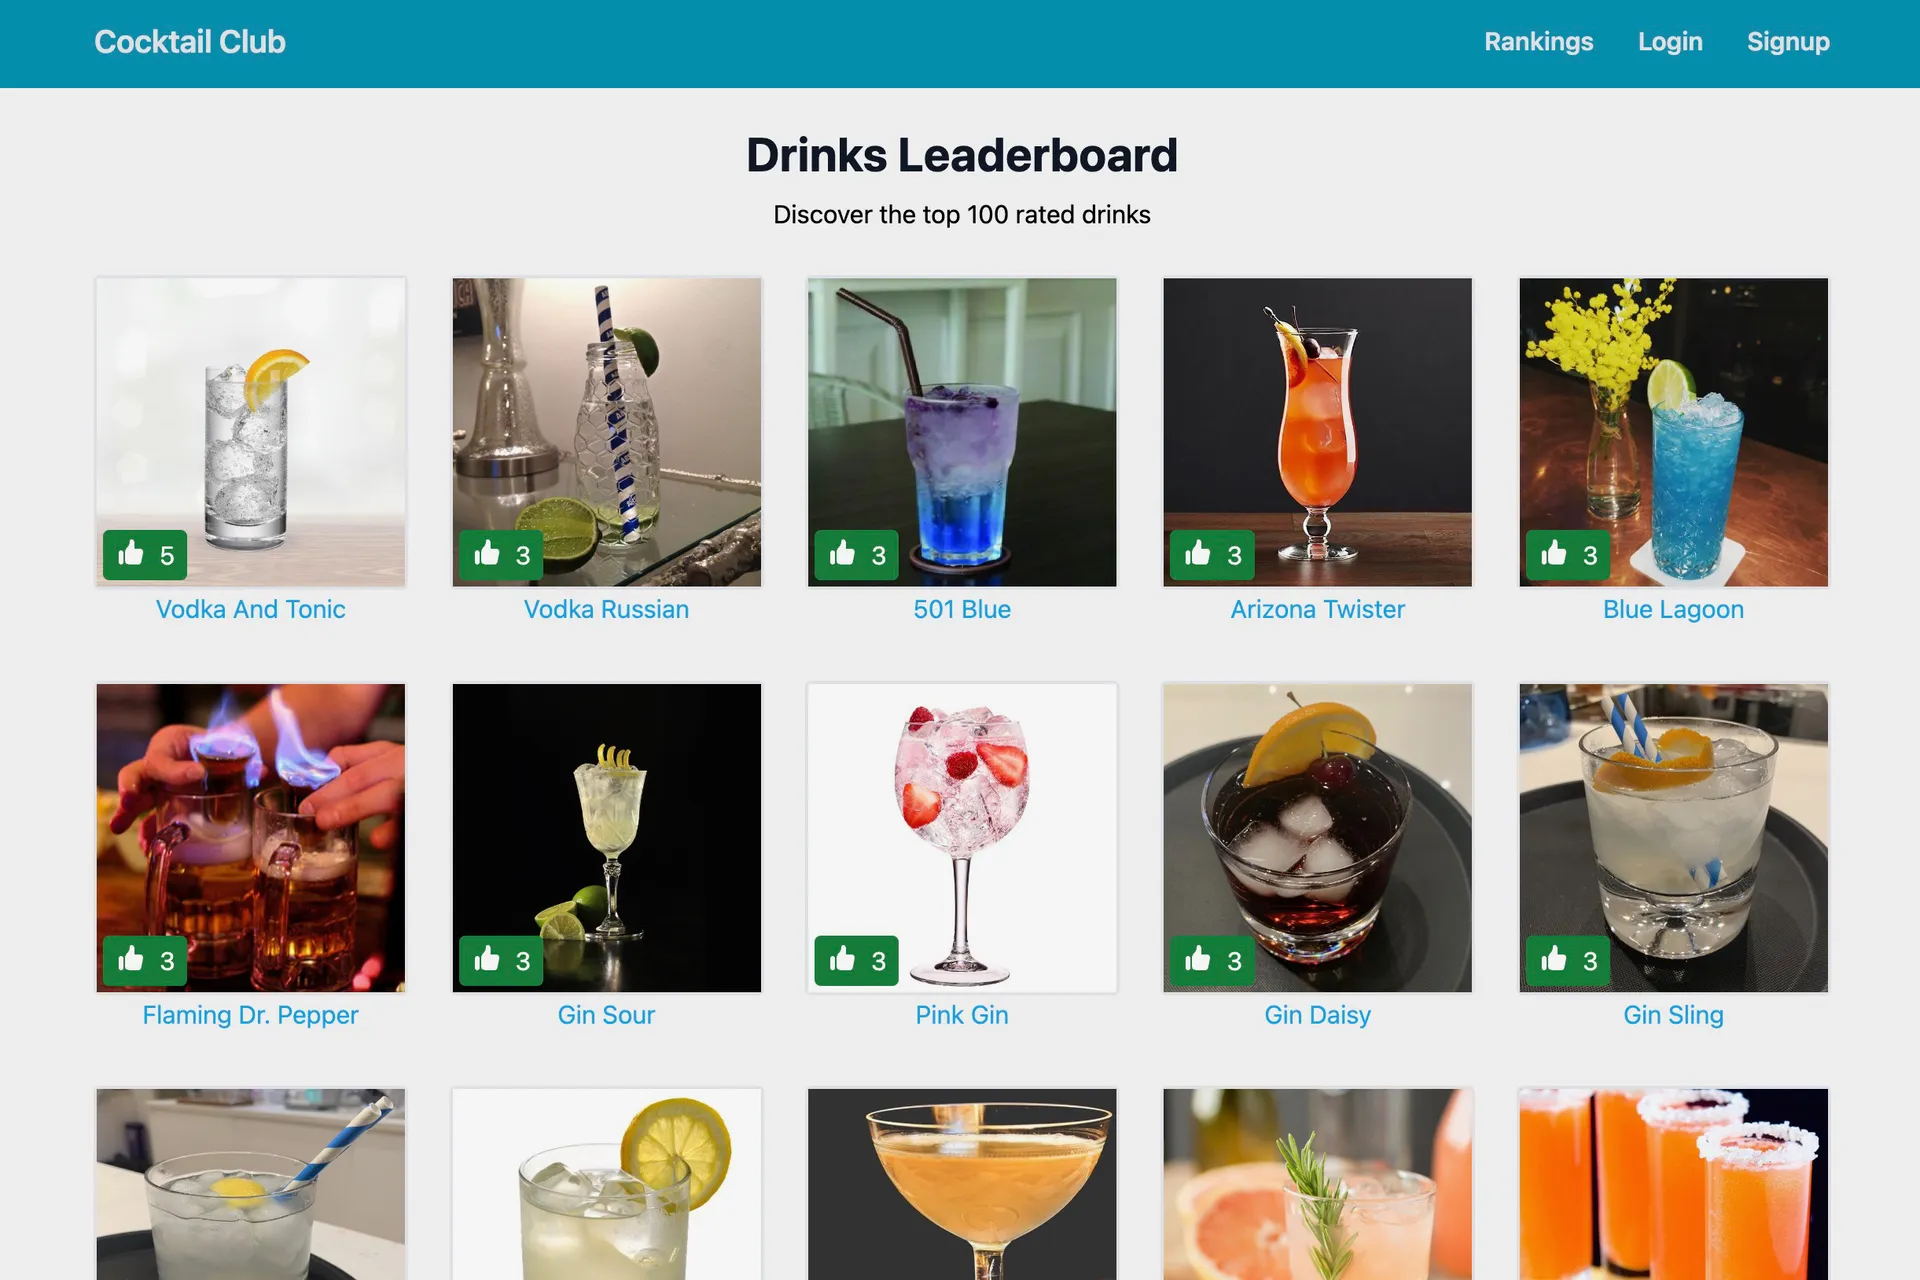 The Cocktail Clubs Drinks Leaderboard page